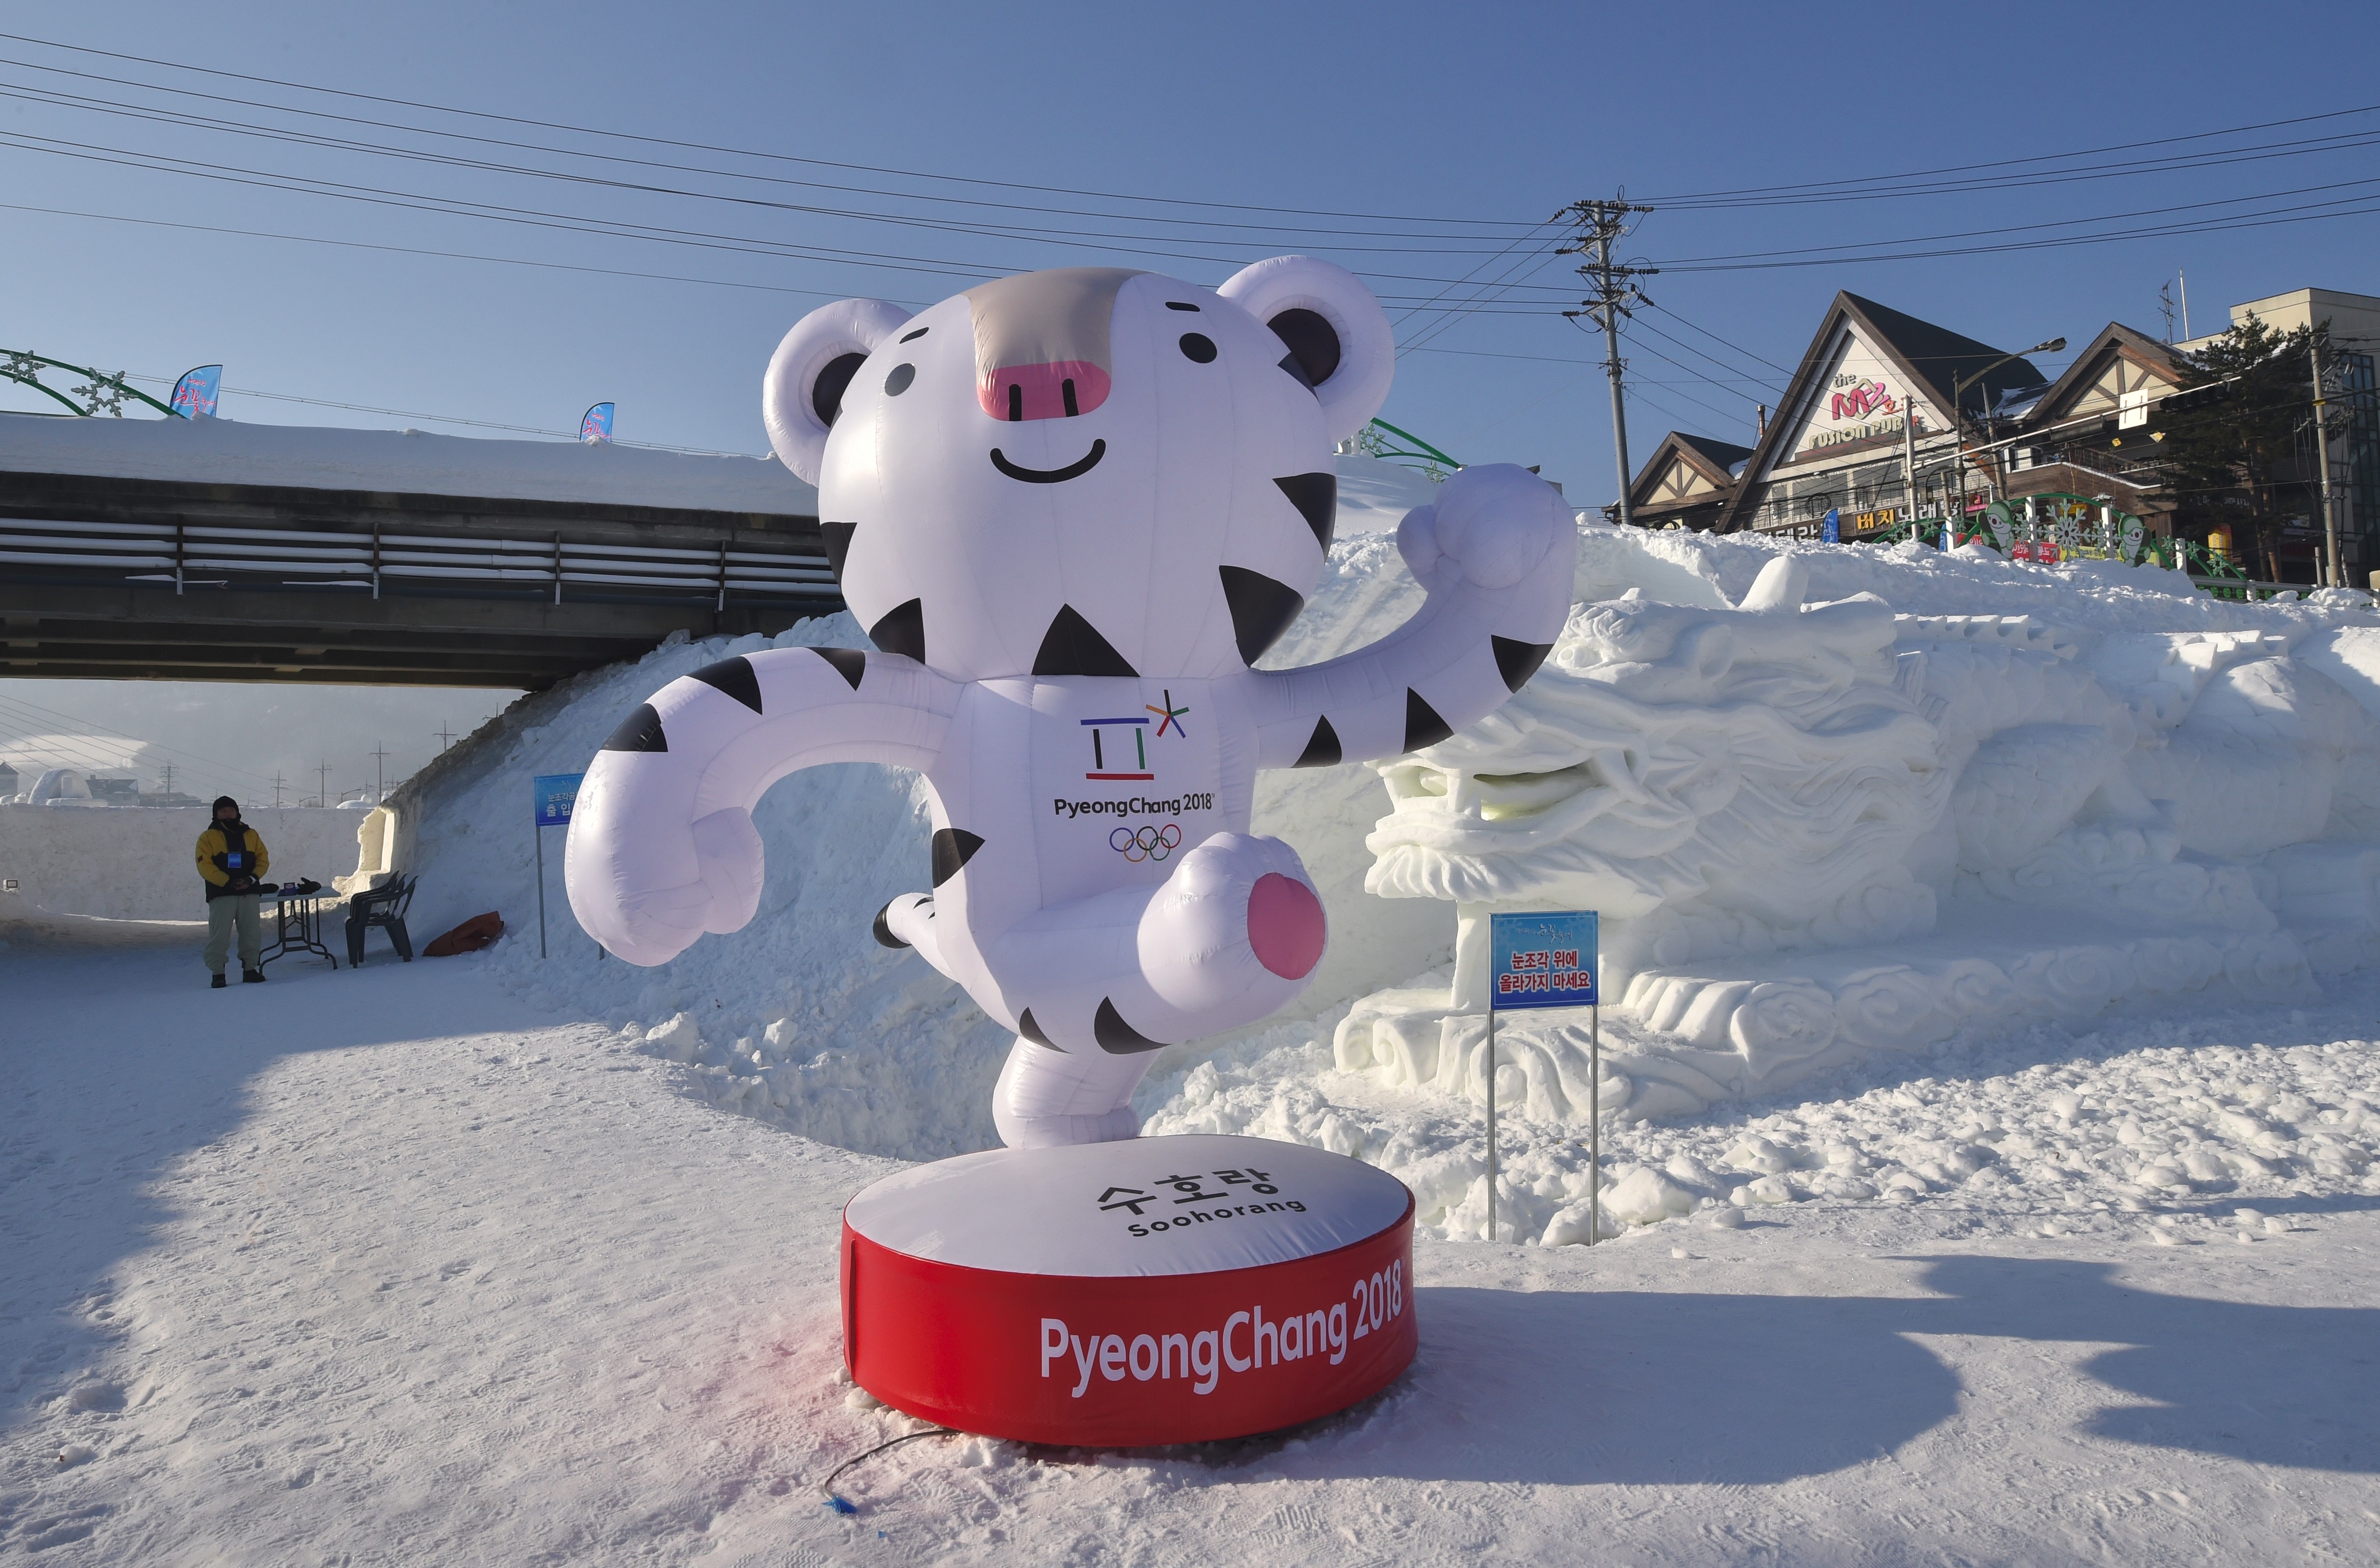 This photo taken February 4, 2017 shows the mascot for the 2018 Pyeongchang Winter Olympic Games, a white tiger named "Soohorang", in the town of Hoenggye in Pyeongchang. (Jung Yeon-Je—AFP/Getty Images)